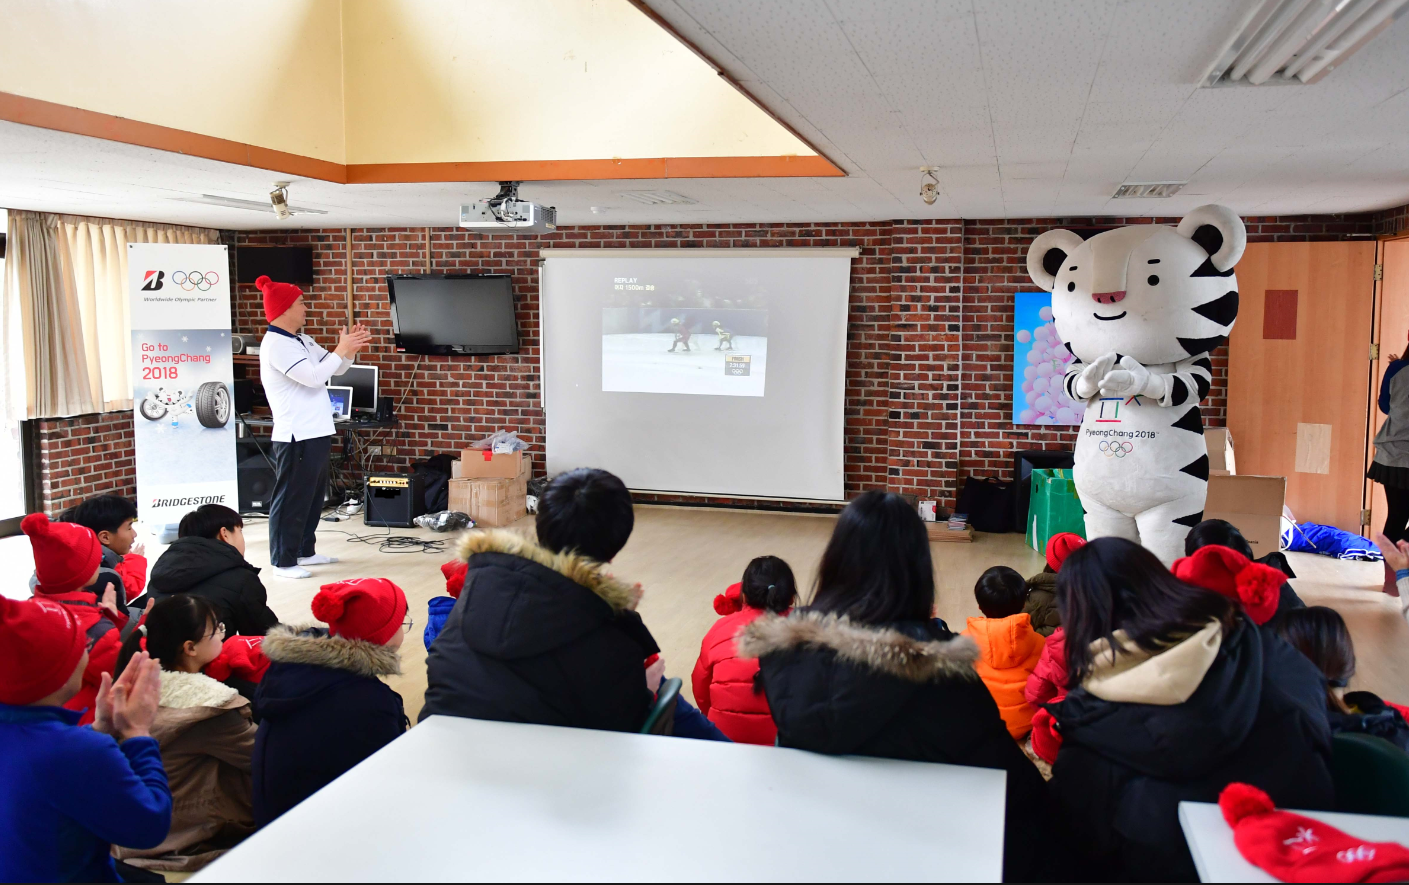 Bridgestone partners with Pyeongchang 2018 Education Programme in aim to benefit disadvantaged youth